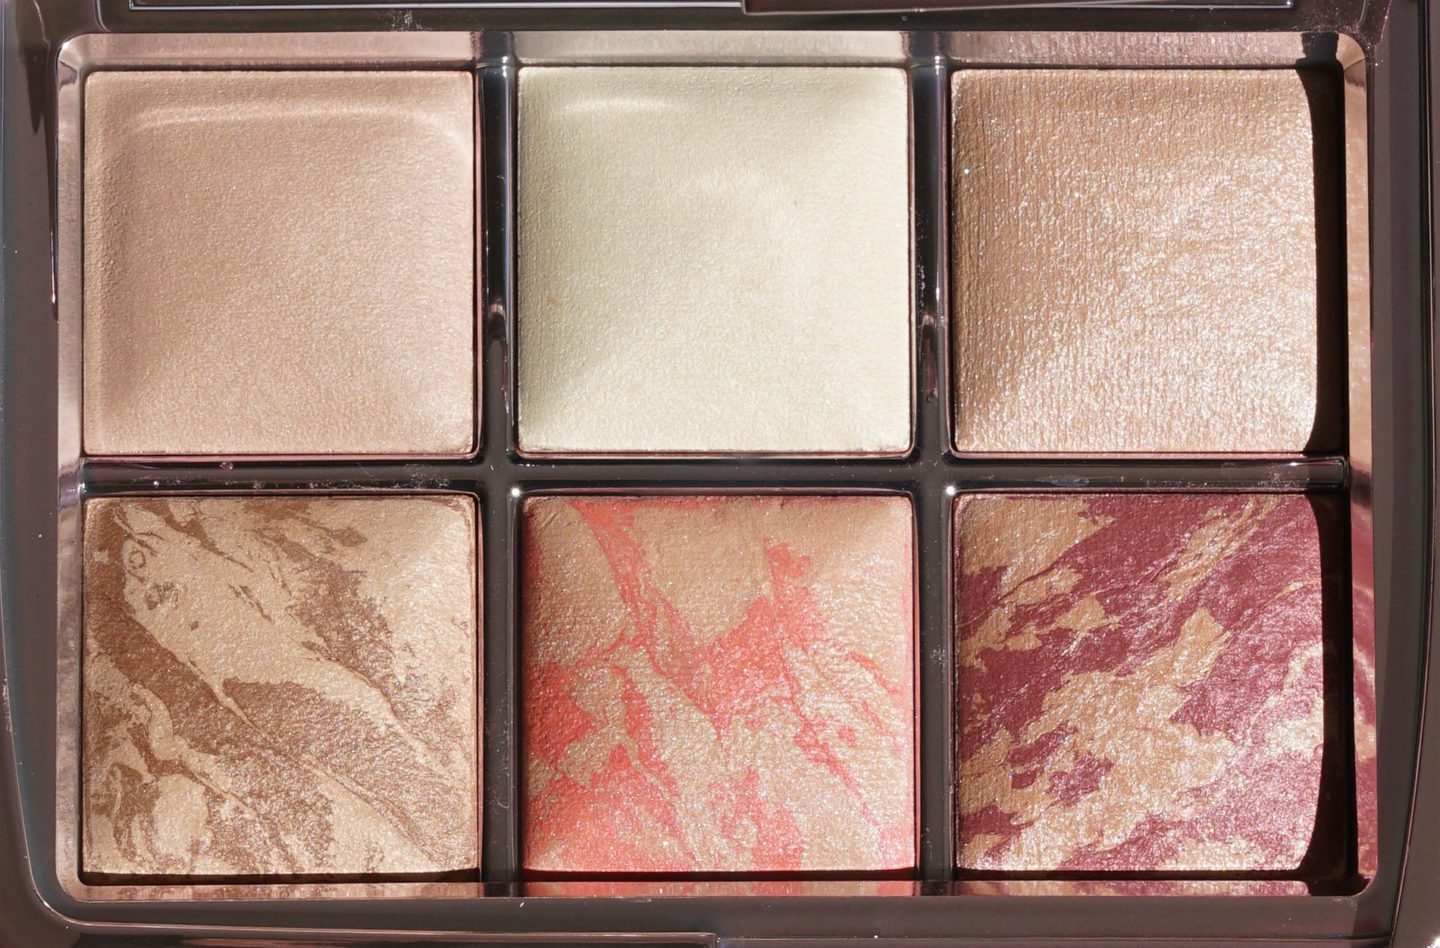 Hourglass Ambient Lighting Edit Palette Vol 4 Holiday 2018 in sunlight